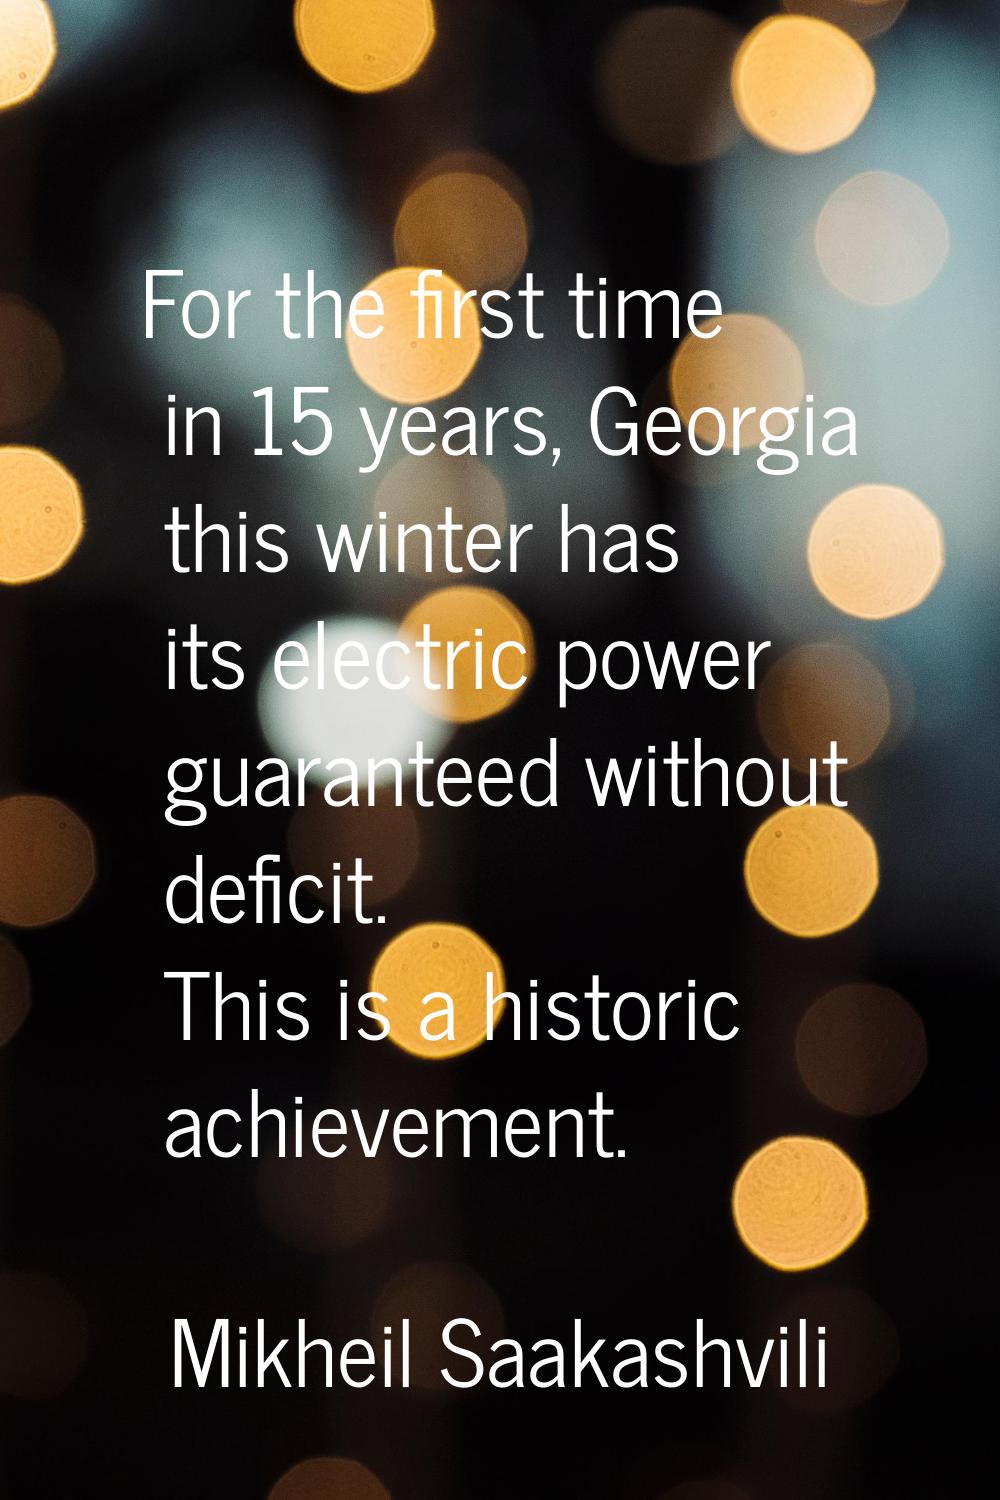 For the first time in 15 years, Georgia this winter has its electric power guaranteed without defic